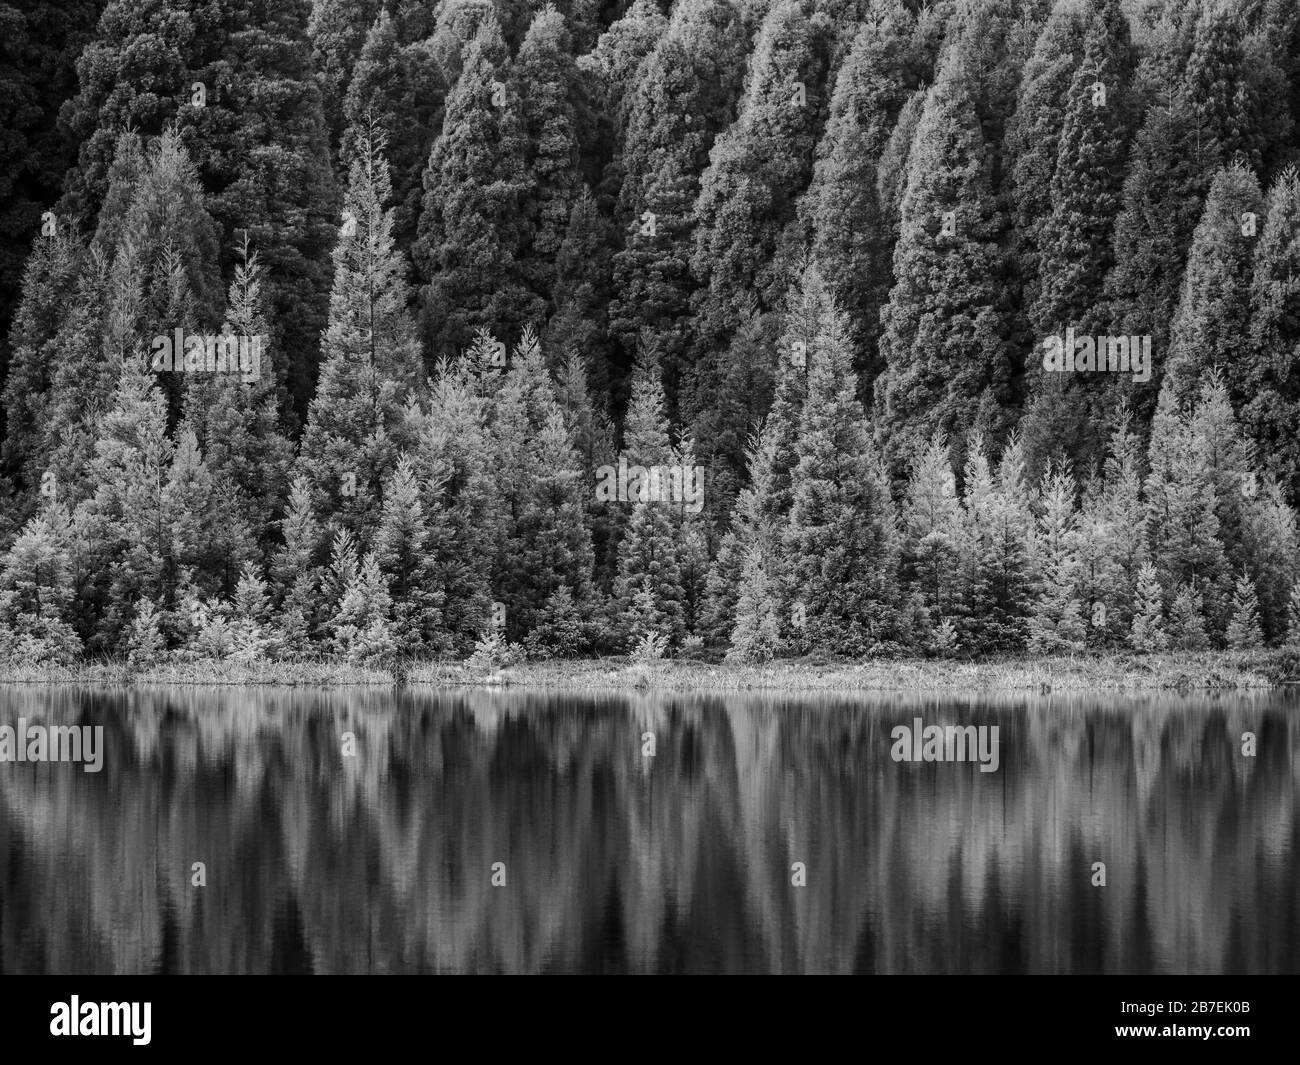 Beautiful reflection of alpine trees on a body of water in black and white Stock Photo